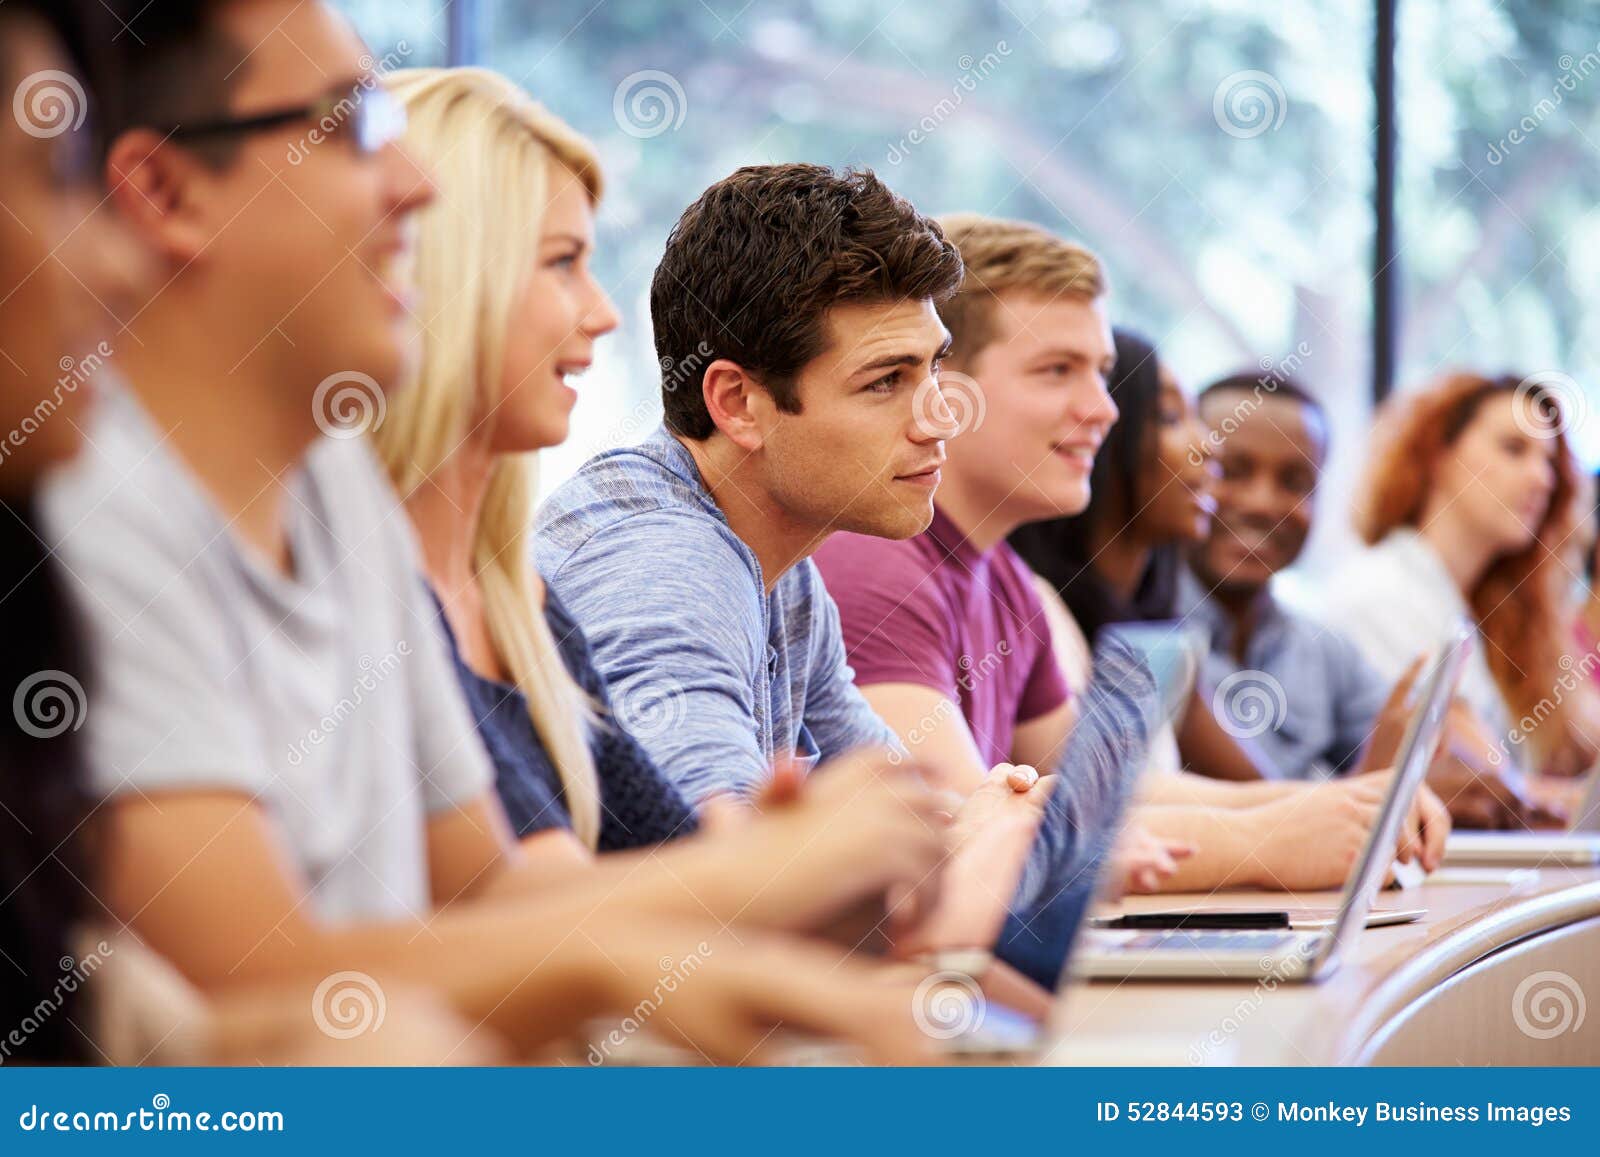 class of university students using laptops in lecture